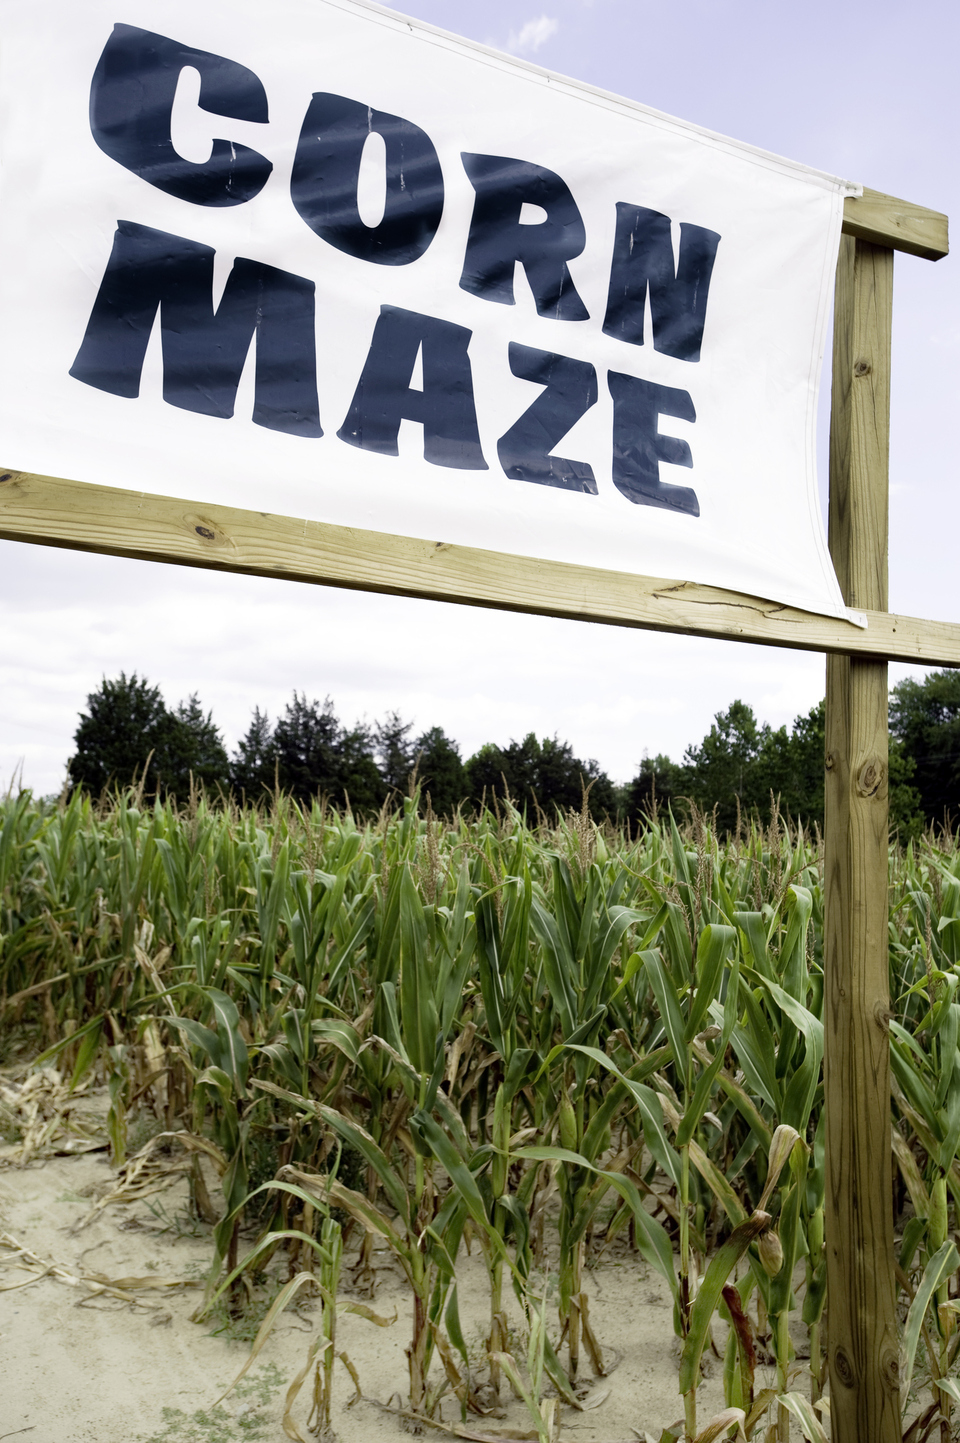 Cornmaze1 gettyimages 112257953